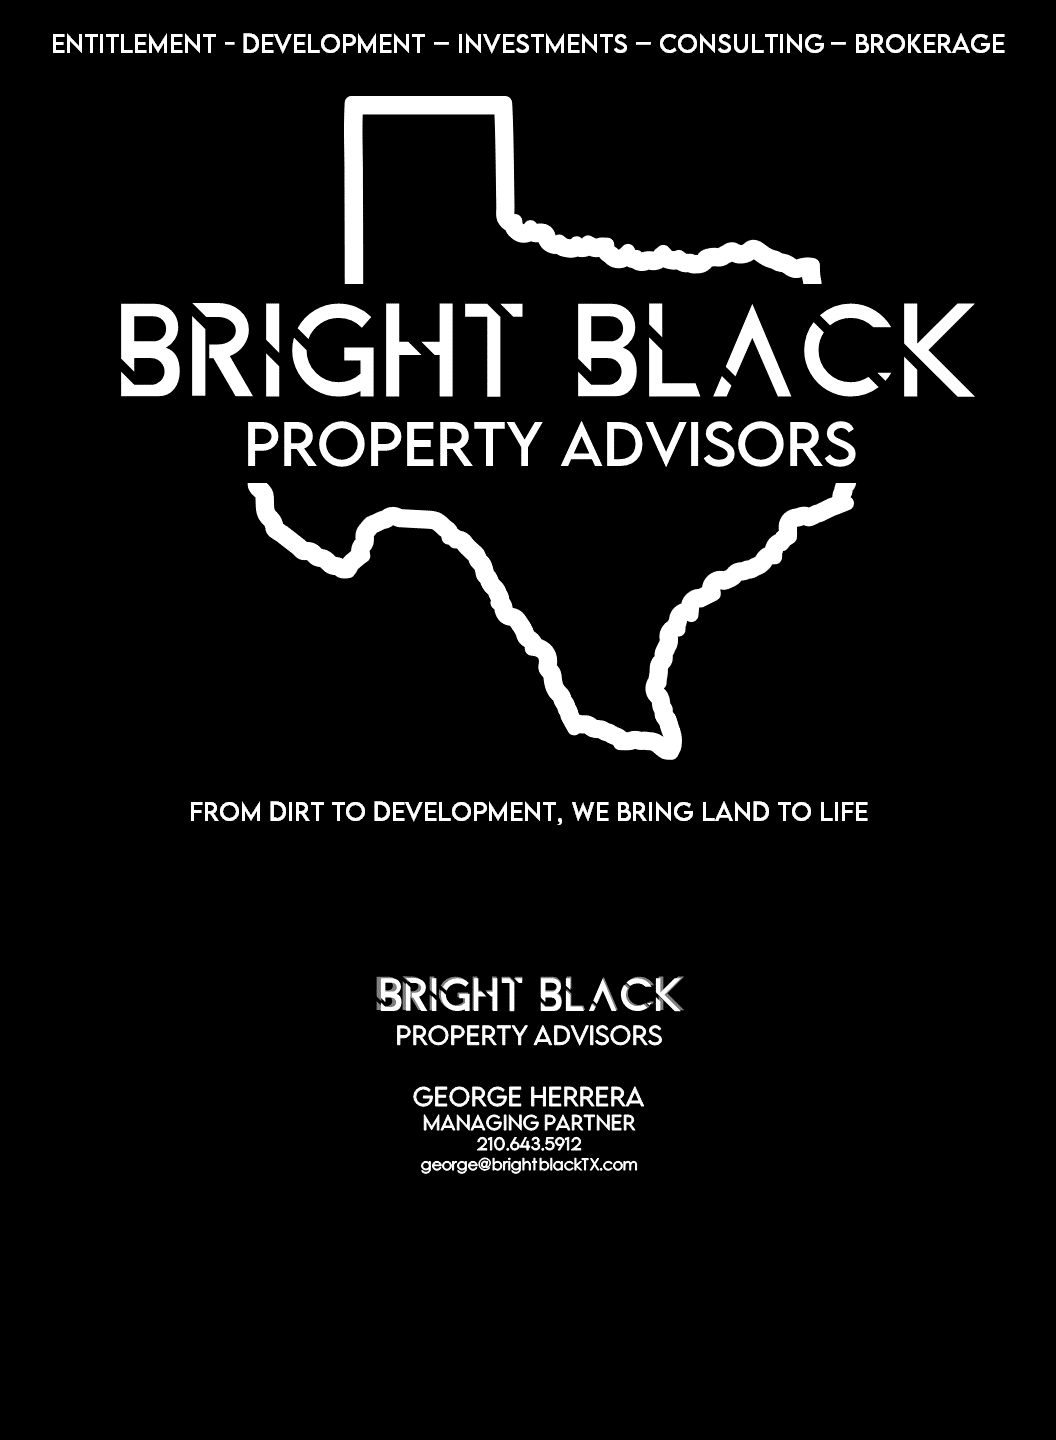 The Bright Black Texas Logo and slogan as well as company information